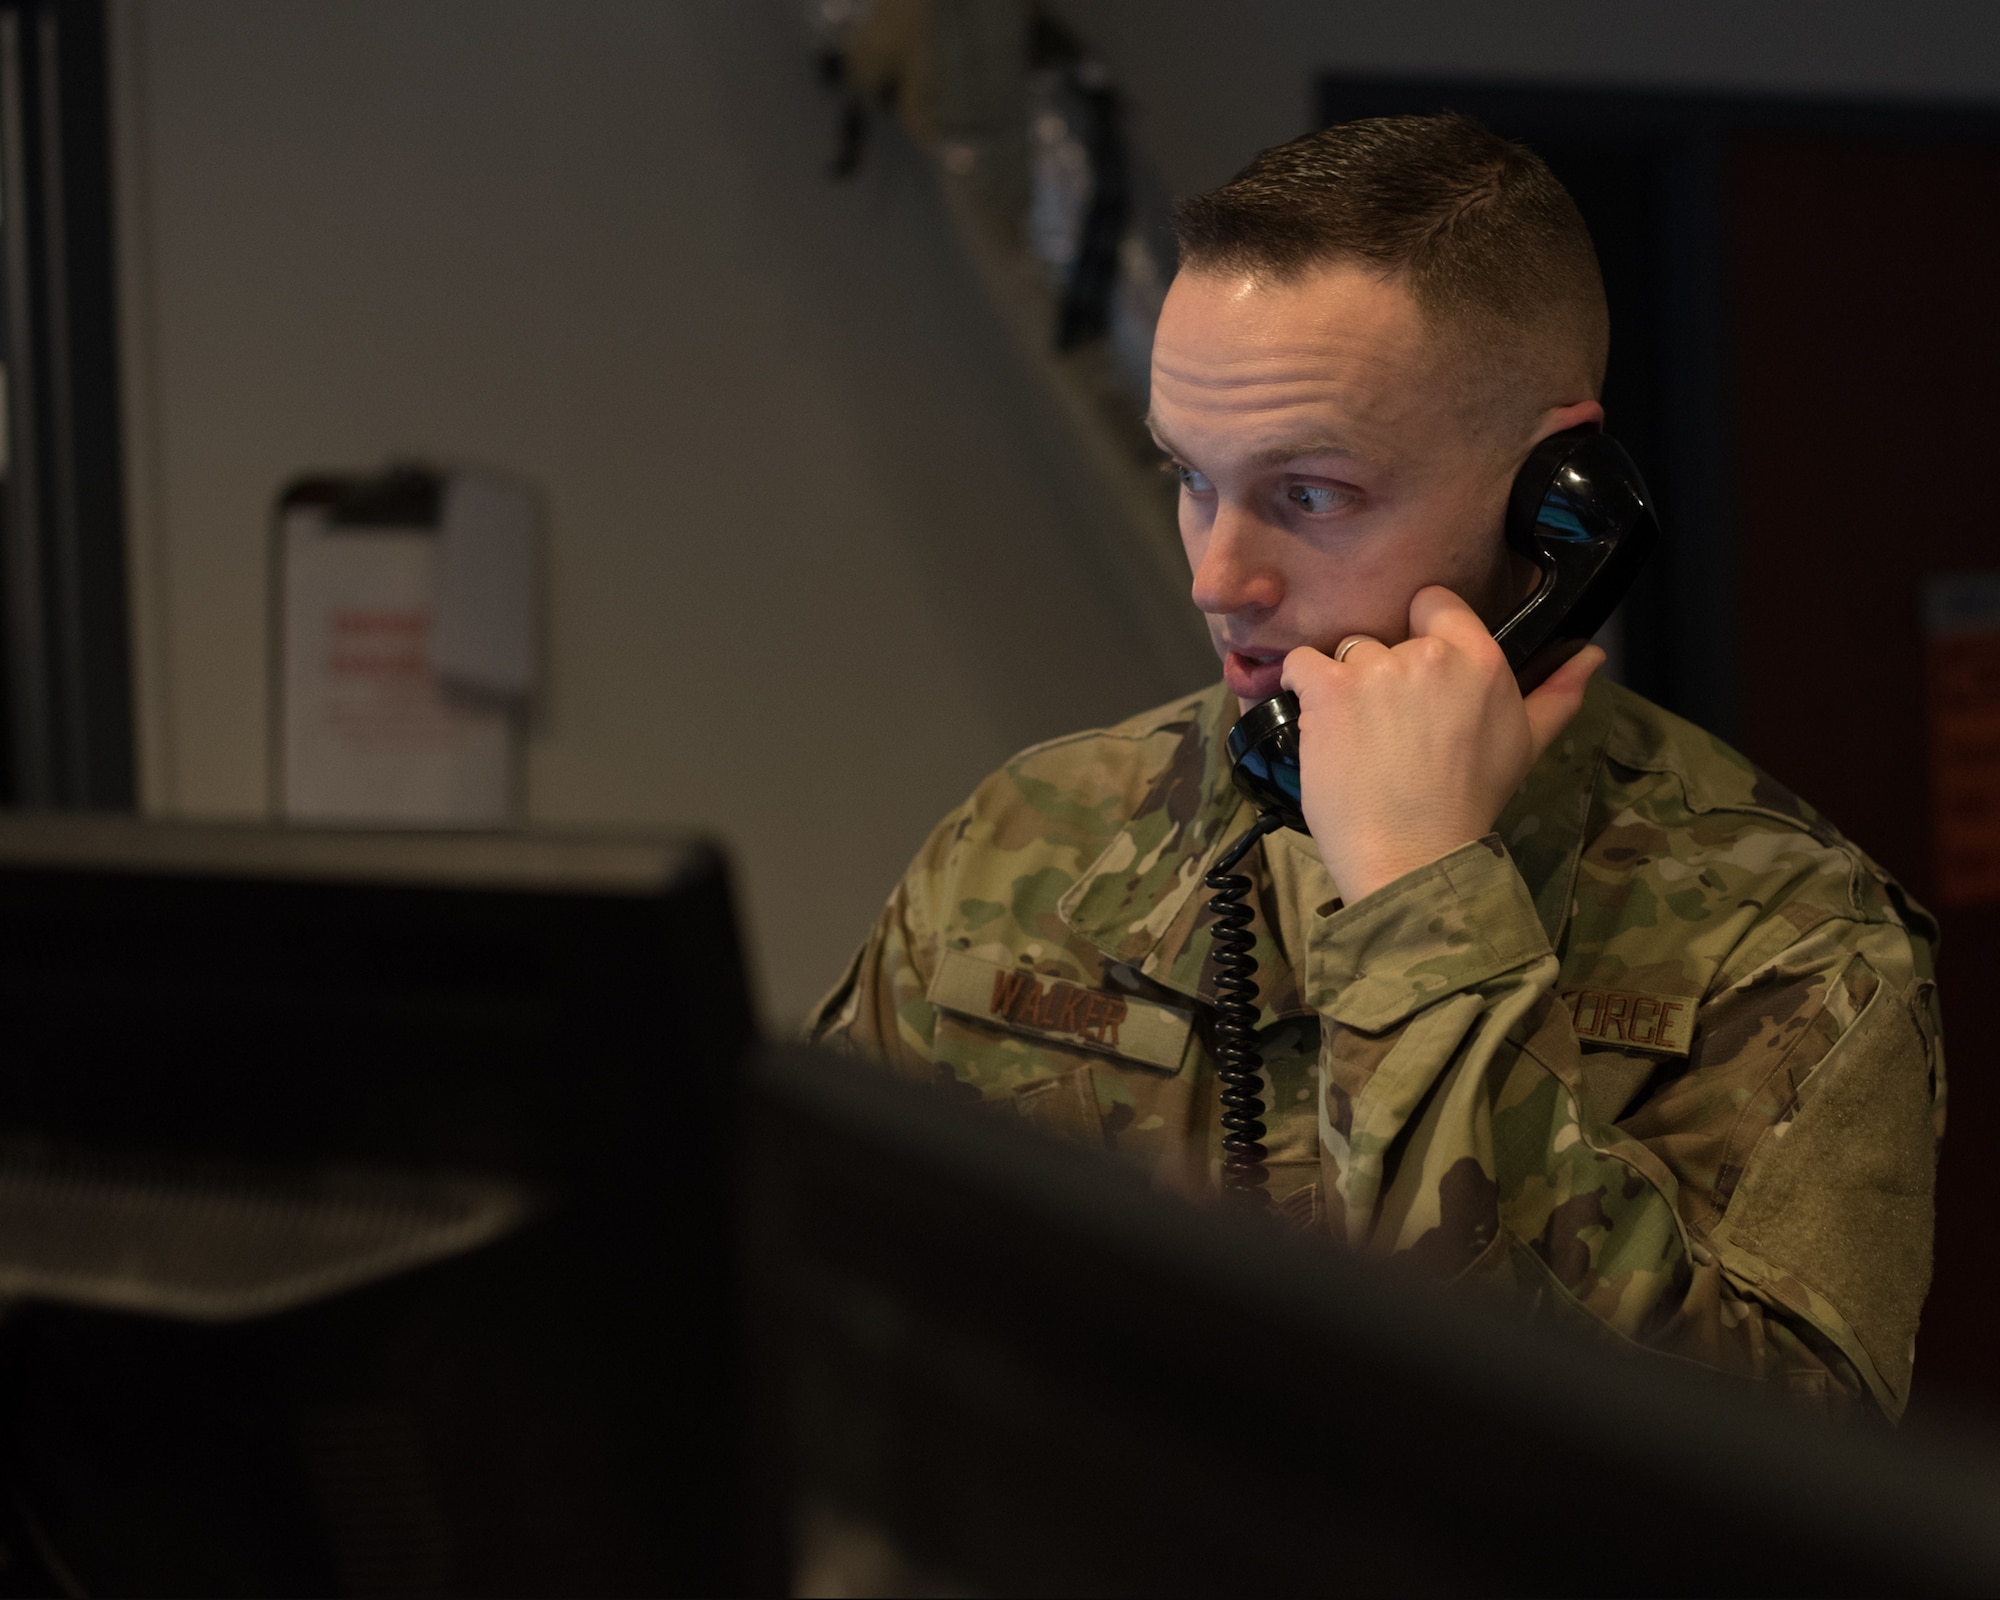 U.S. Air Force Staff Sgt. Gabriel Walker, 60th Maintenance Group Maintenance Operations Center senior maintenance controller, coordinates with higher headquarters to send a maintenance recovery team to Joint Base Pearl Harbor-Hickam, Hawaii, Jan. 25, 2019 at Travis Air Force Base, Calif. The MOC coordinates maintenance actions for all aircraft at Travis and Travis aircraft flying missions all over the world. (U.S. Air Force photo by Tech. Sgt. James Hodgman)